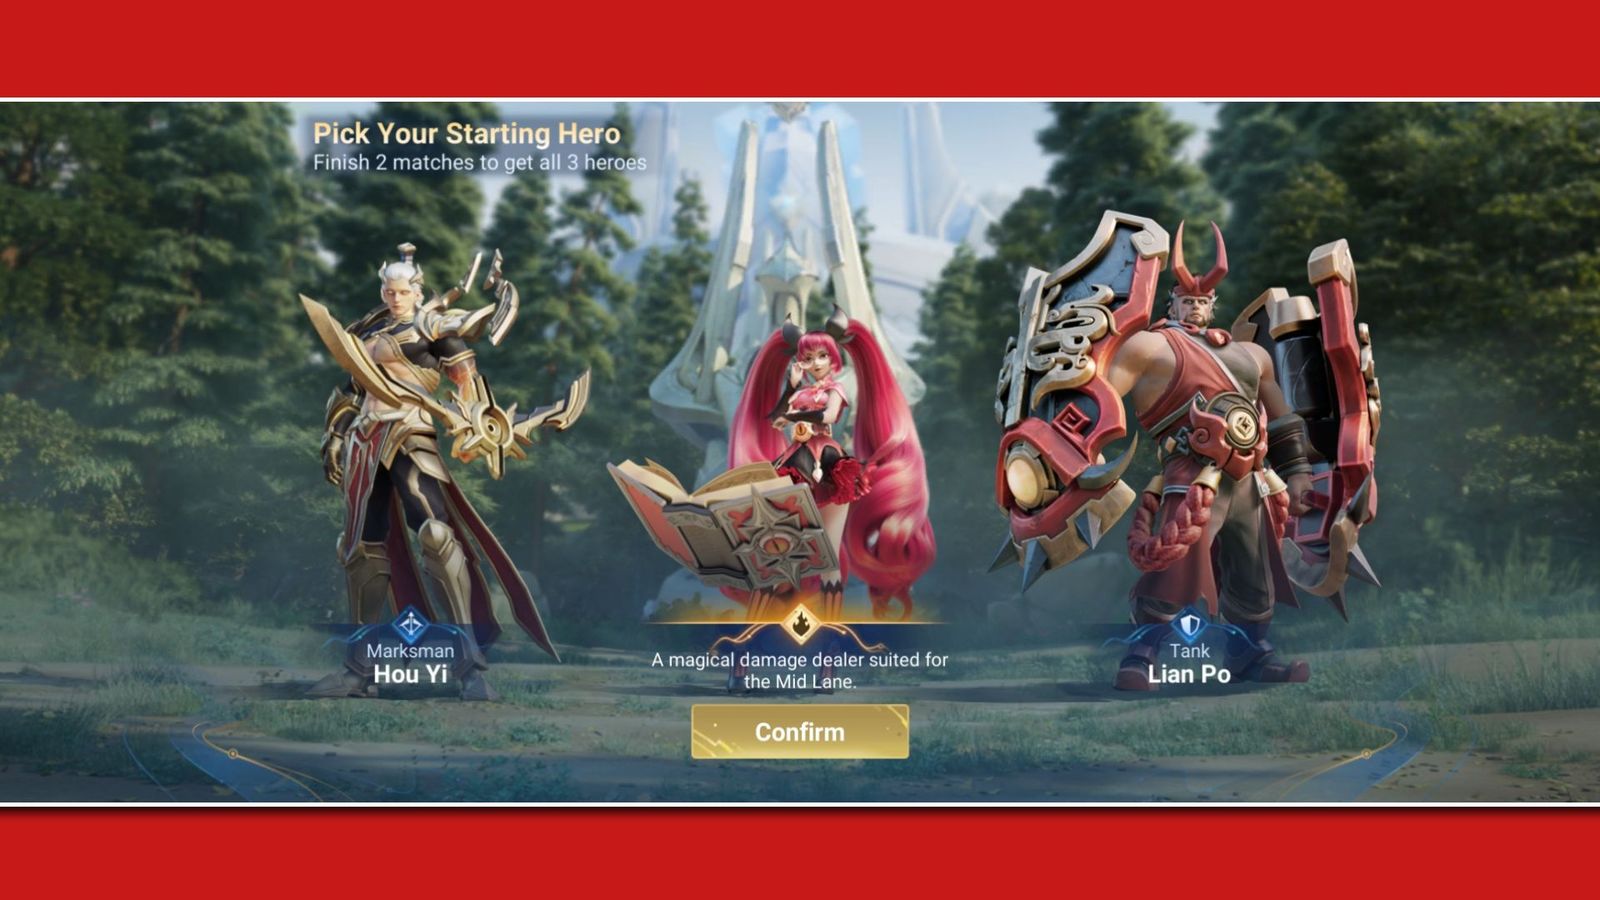 A screenshot of the starting heroes in Honor of Kings, with Hou Yi on the left, Angela in the middle, and Lian Po on the right.